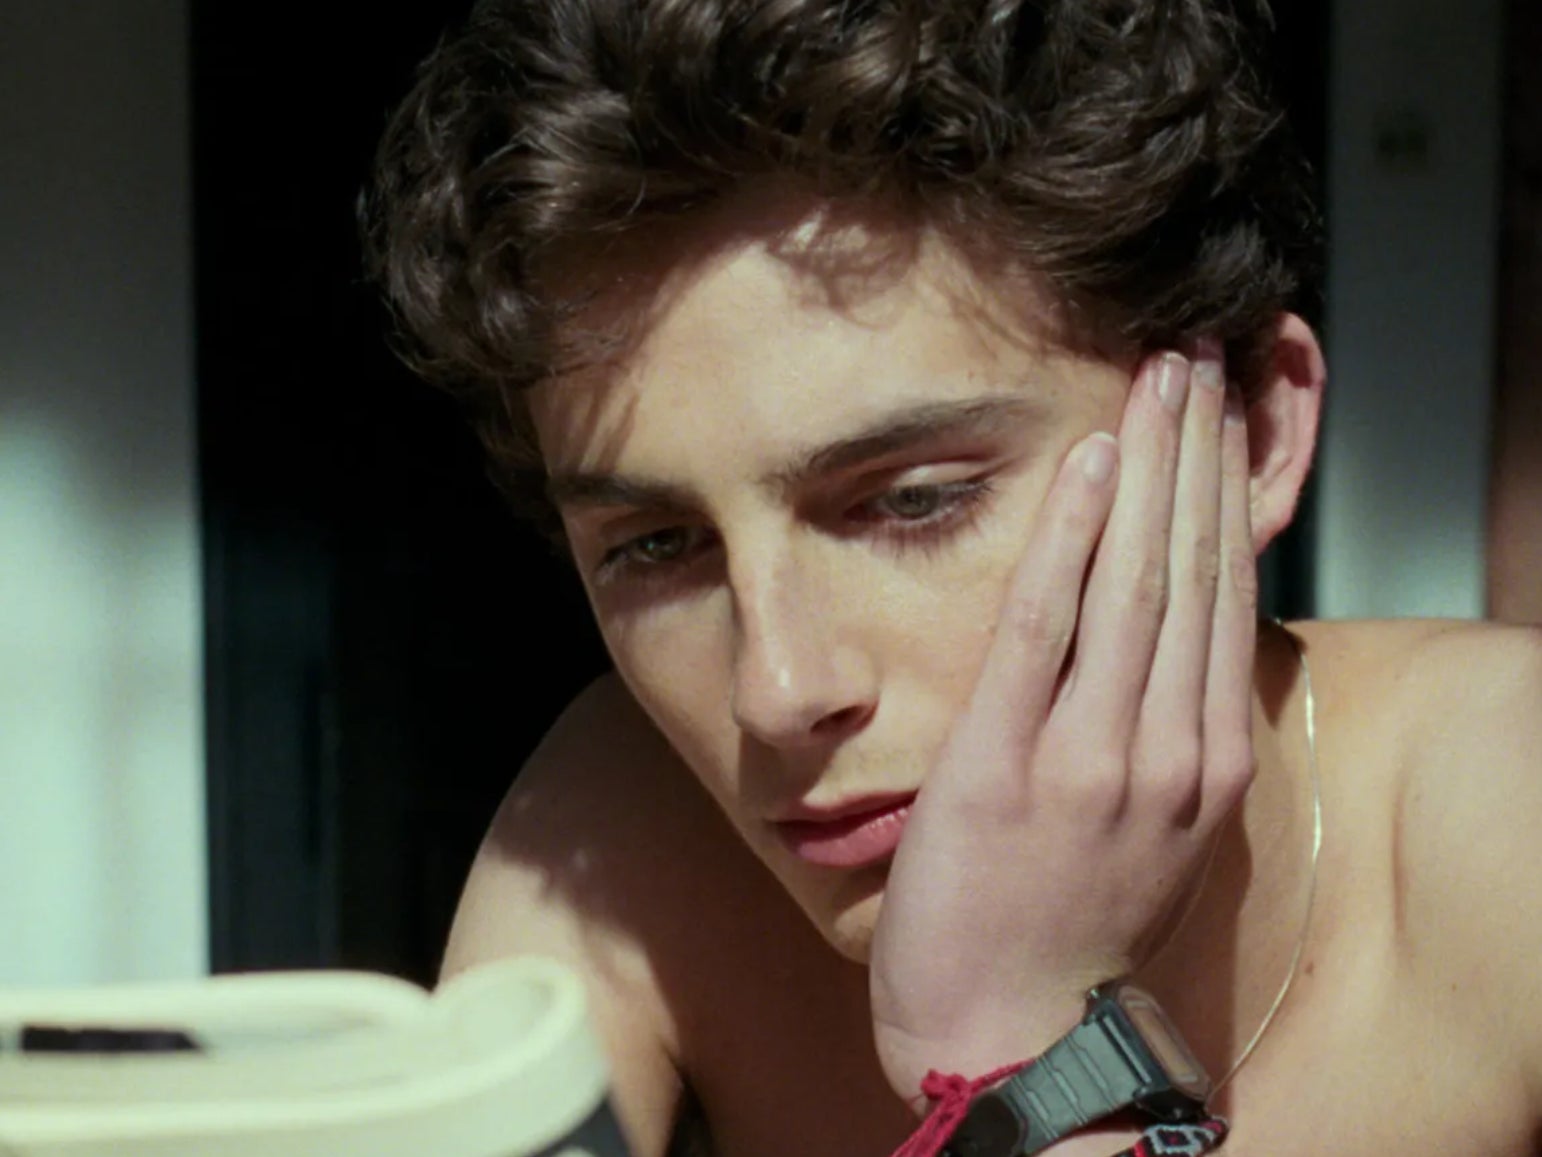 James Ivory wrote 2017 film ‘Call Me By Your Name’, which stars Timothée Chalamet